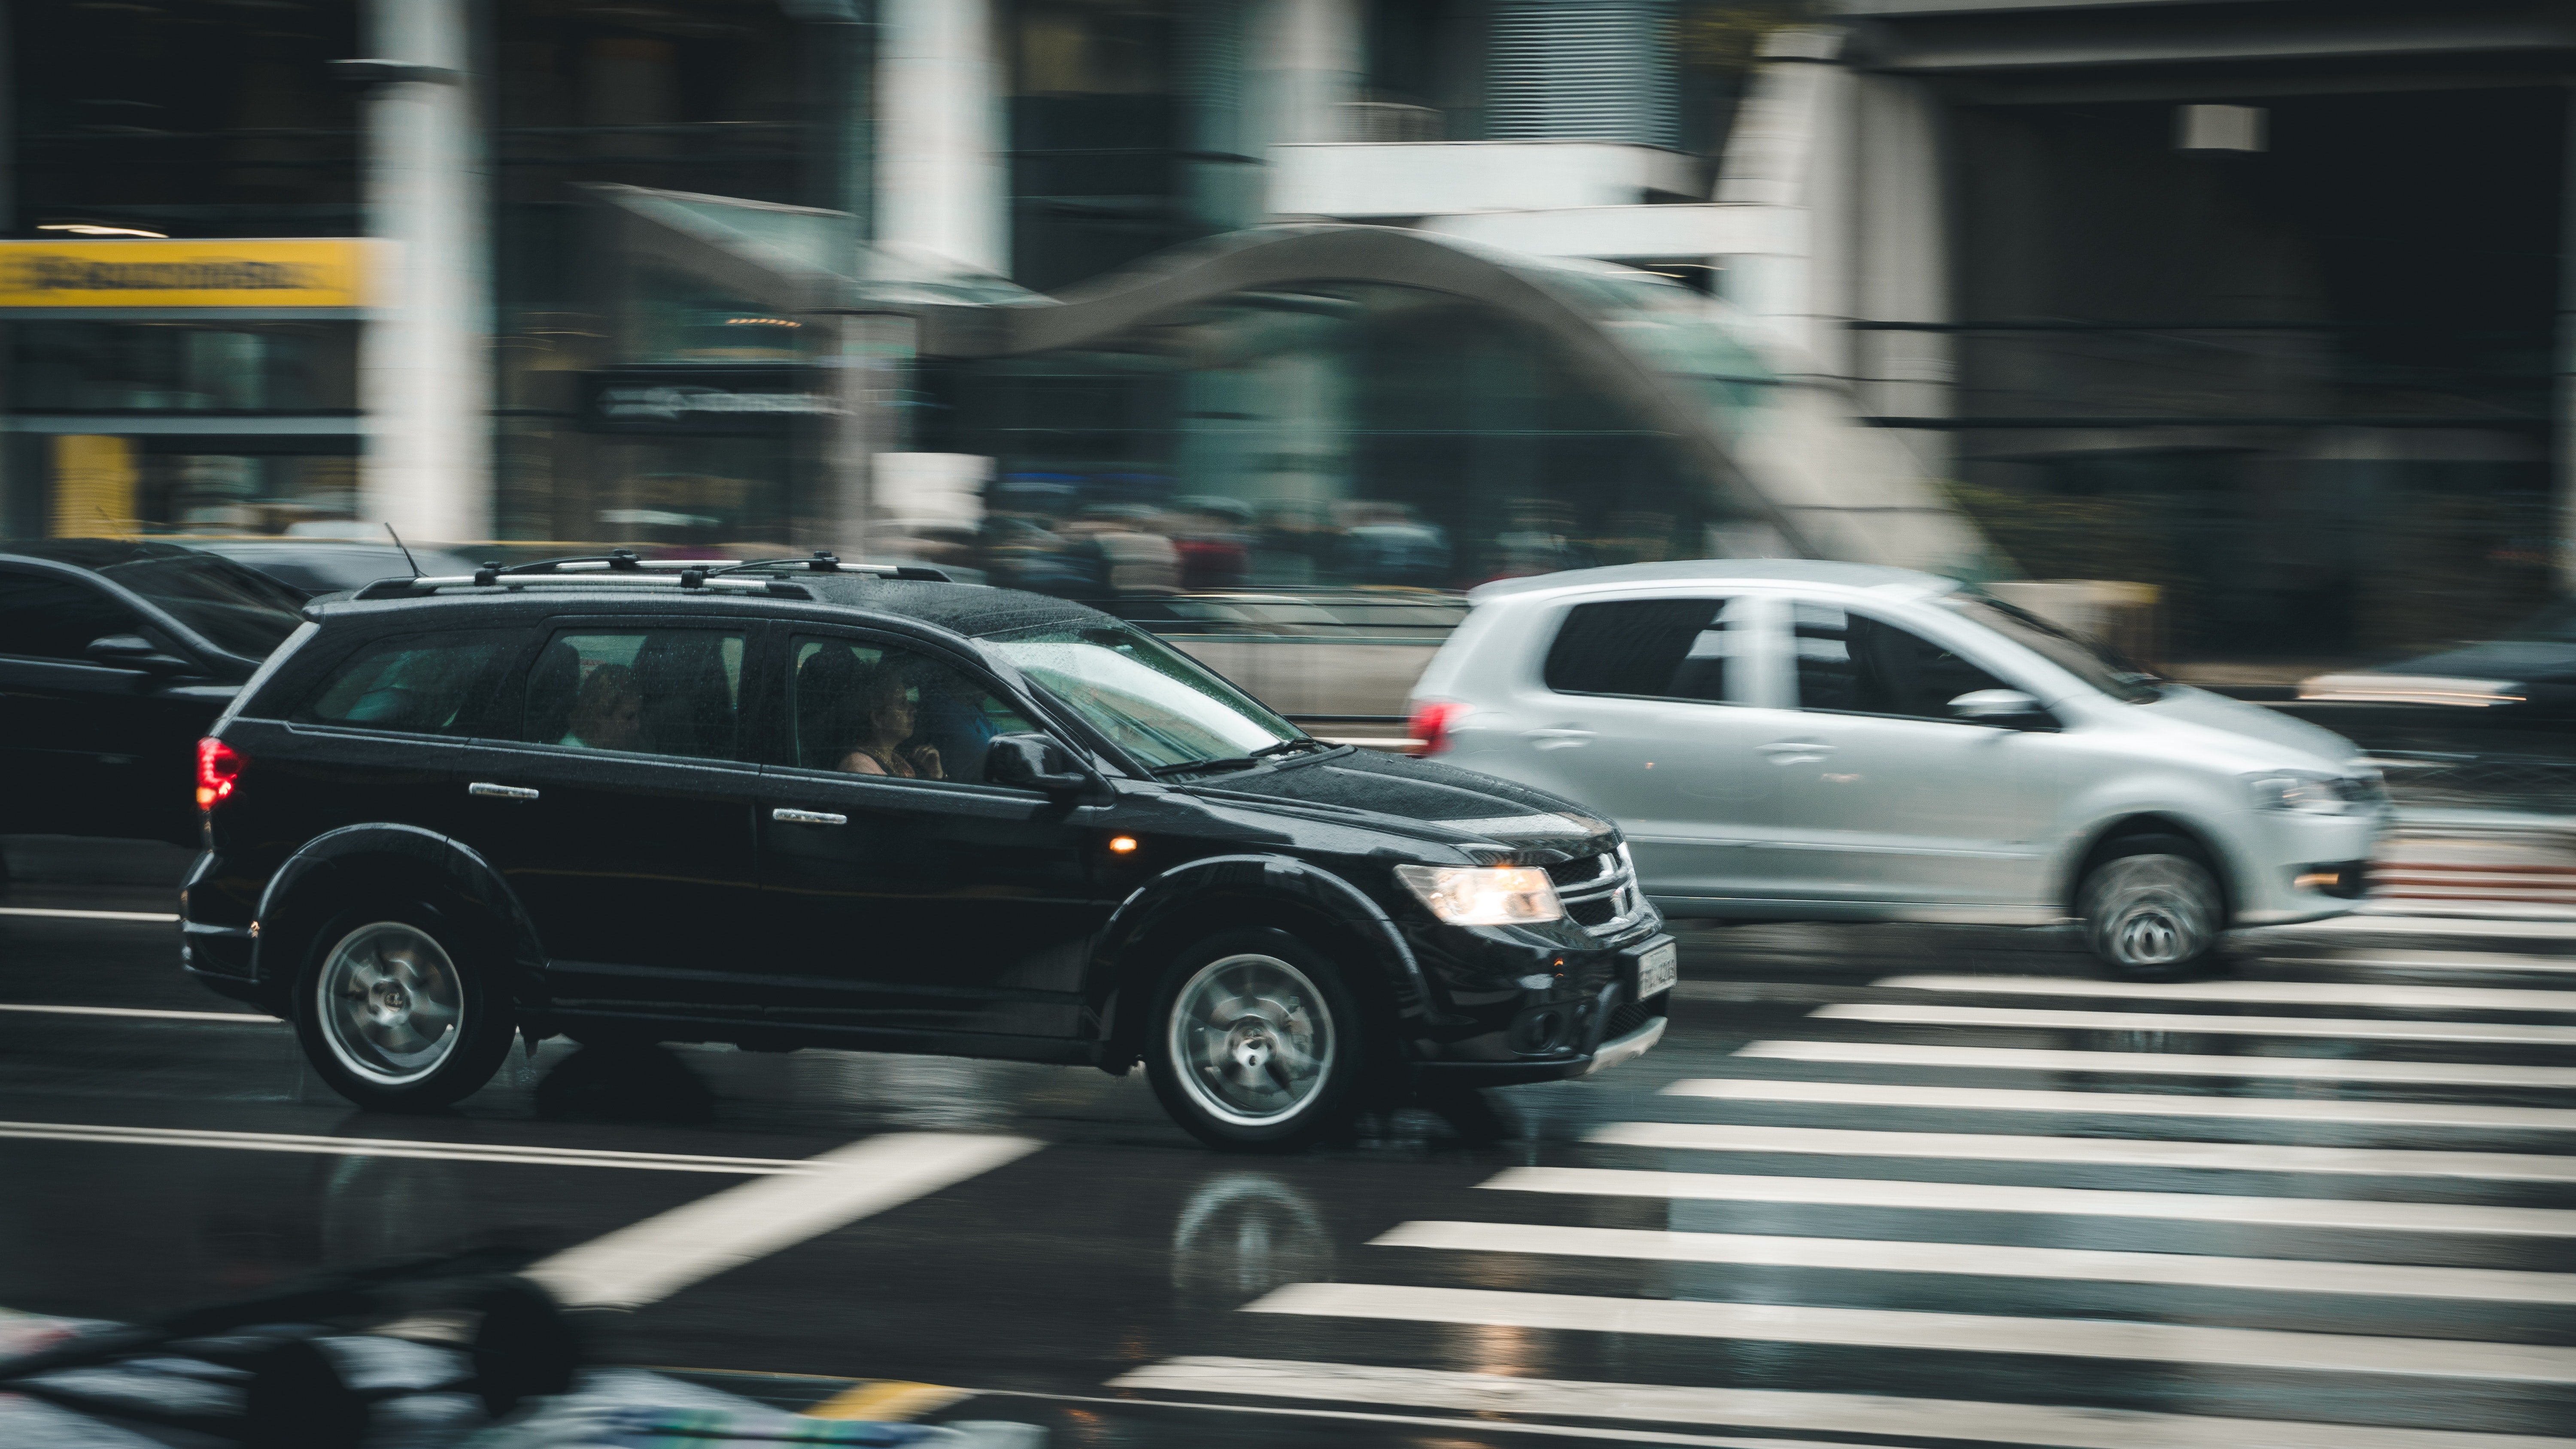 Two cars driving over a zebra stripe. | Source: Pexels/Kaique Rocha